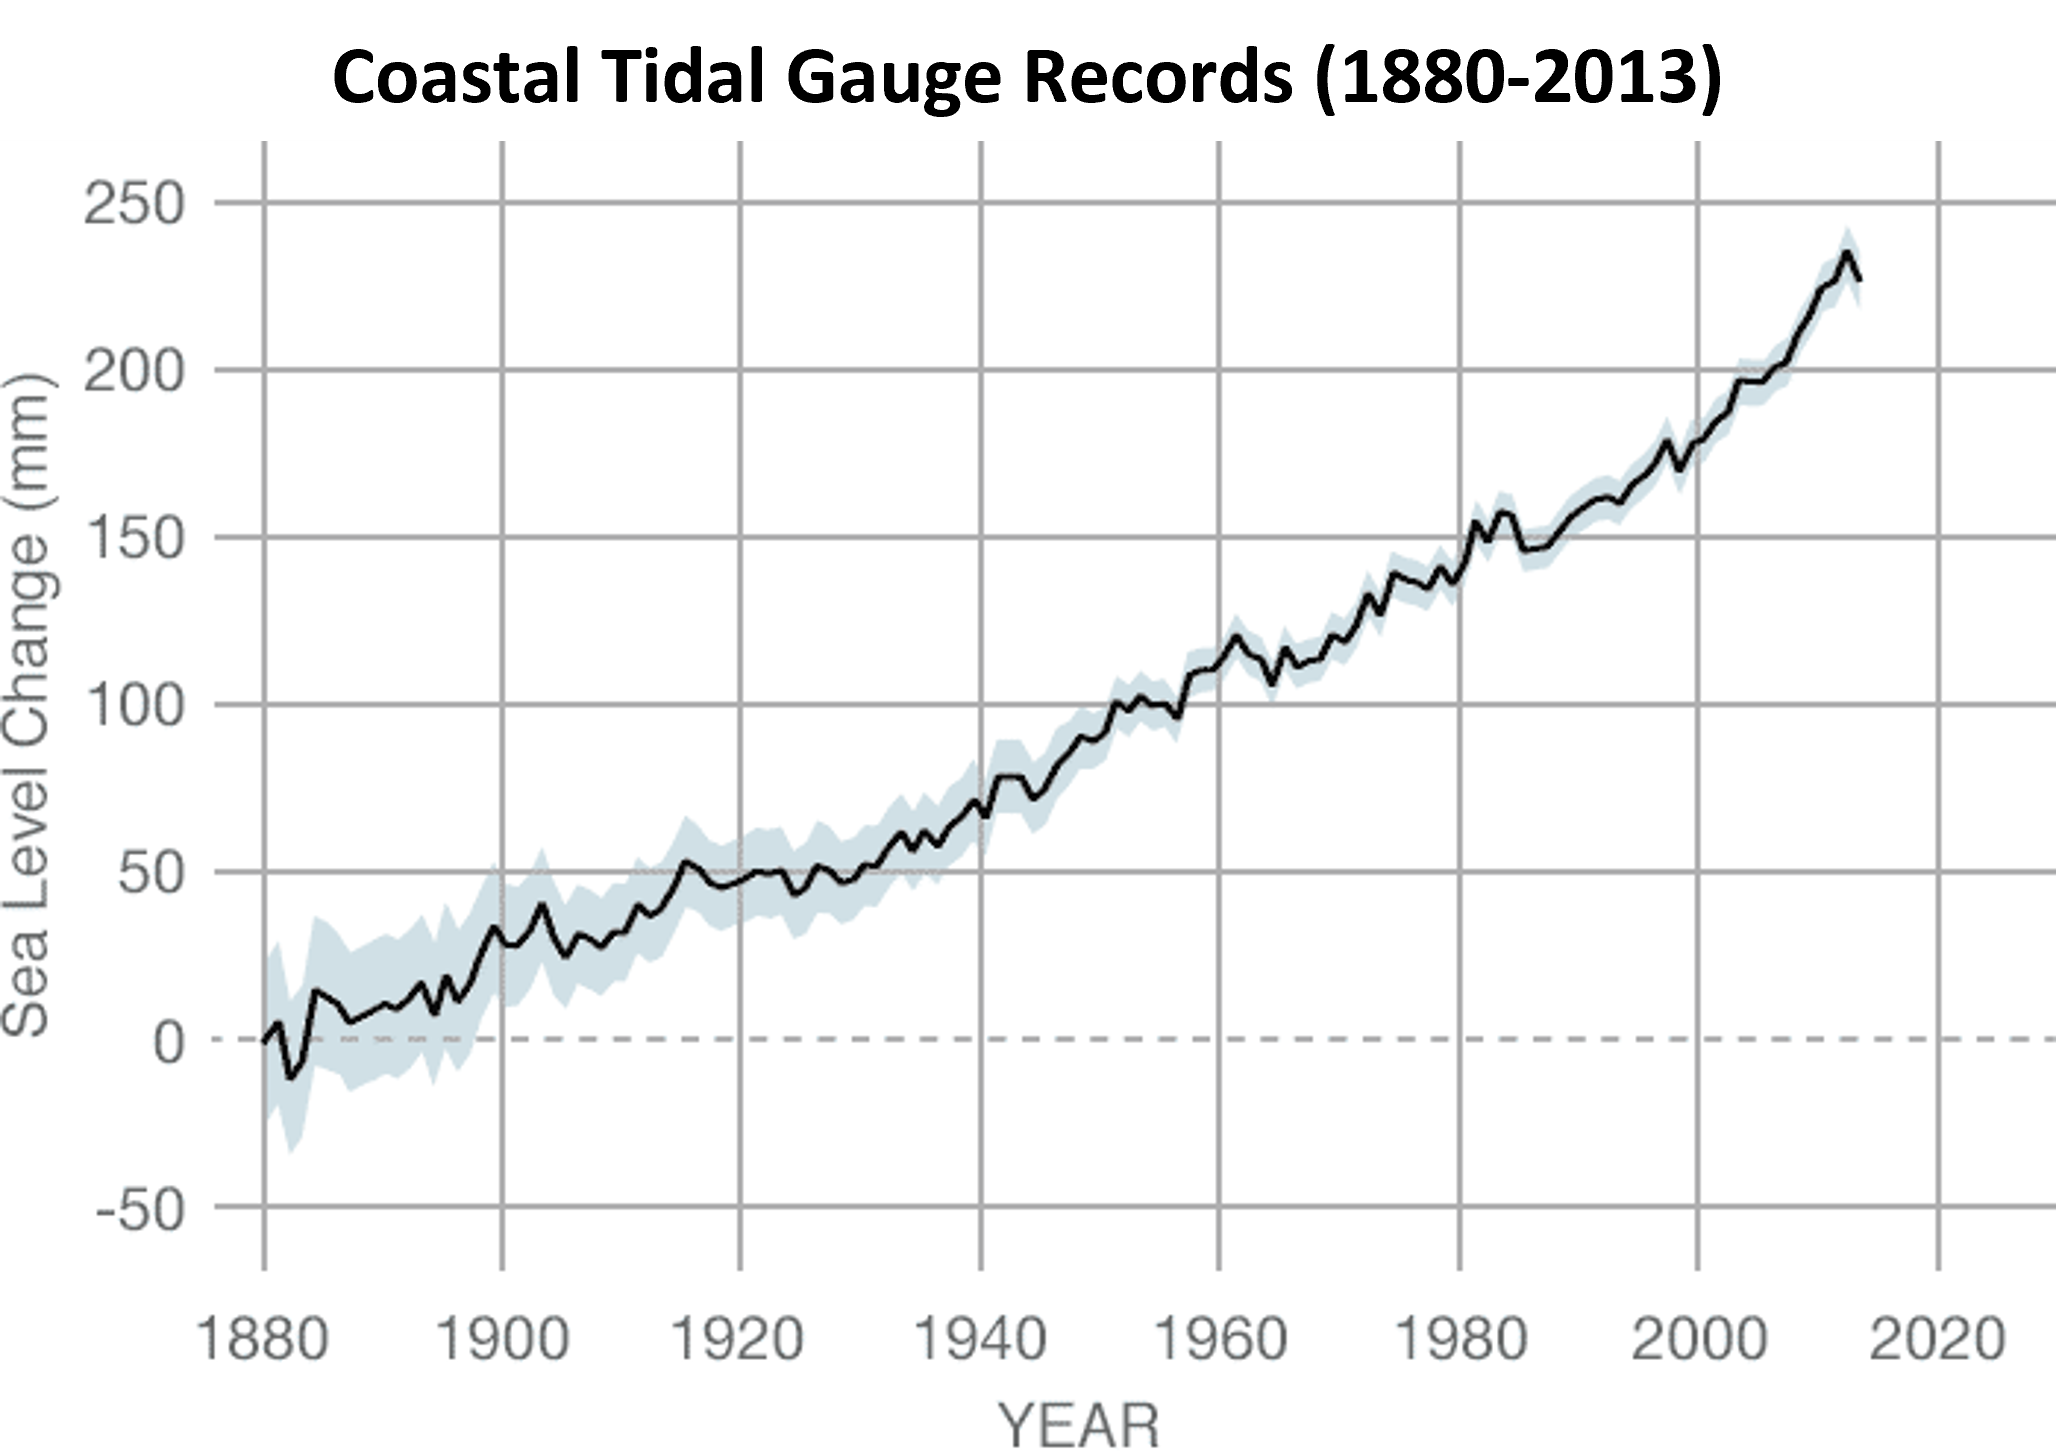 Coastal tidal gauge records graph. Y-axis is "Sea Level change (mm)", going from -50 to 250. X-axis is "Year", going from 1880 to 2013. The plot has a general upward trend.